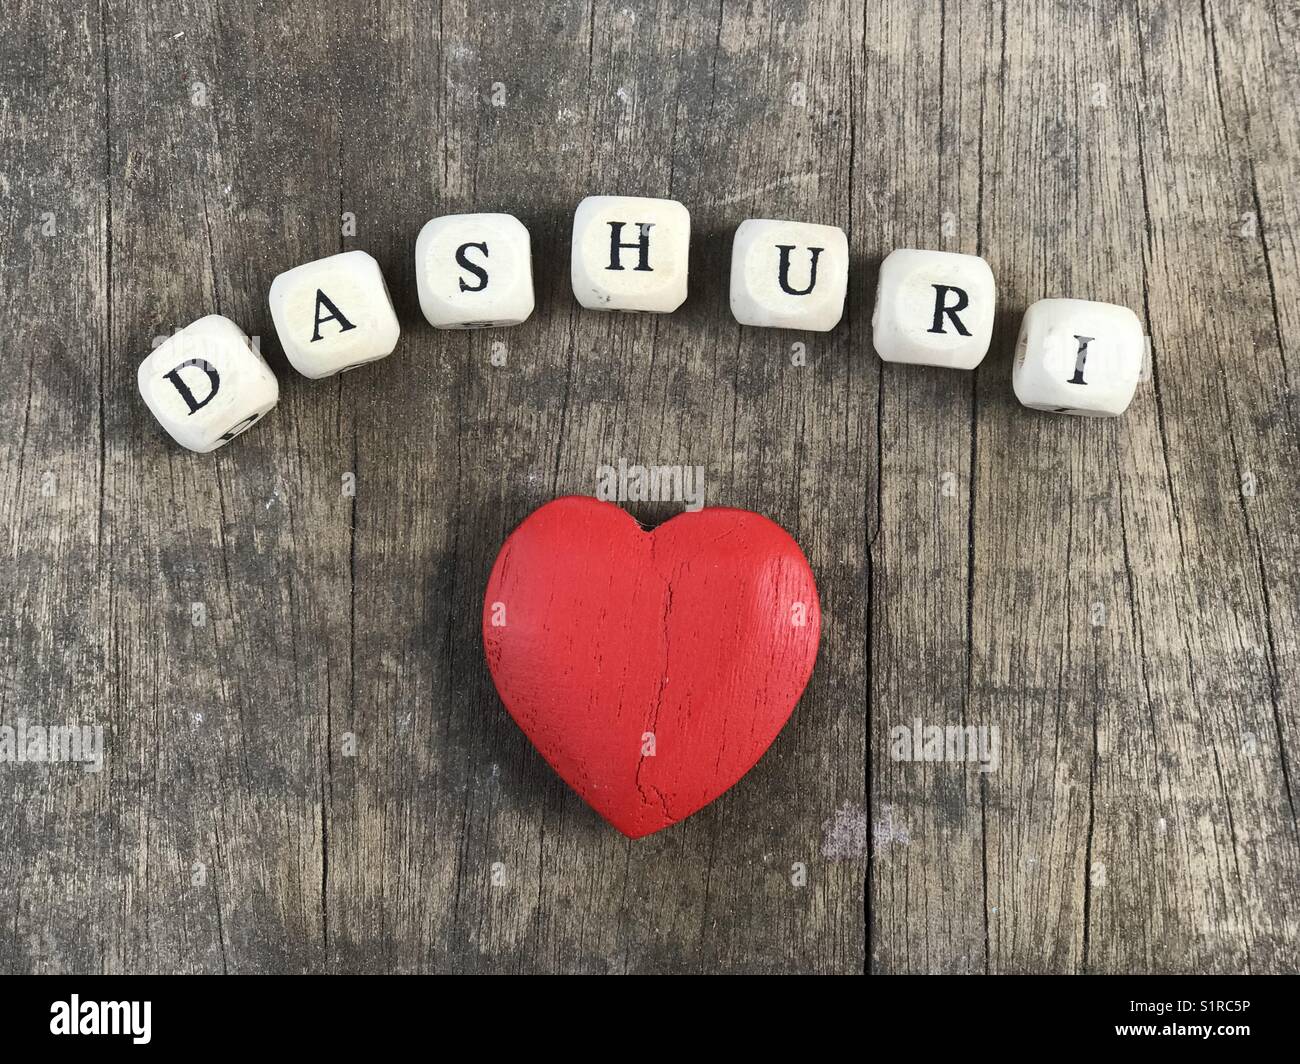 Dashuri, love in albanian language with wooden letters Stock Photo